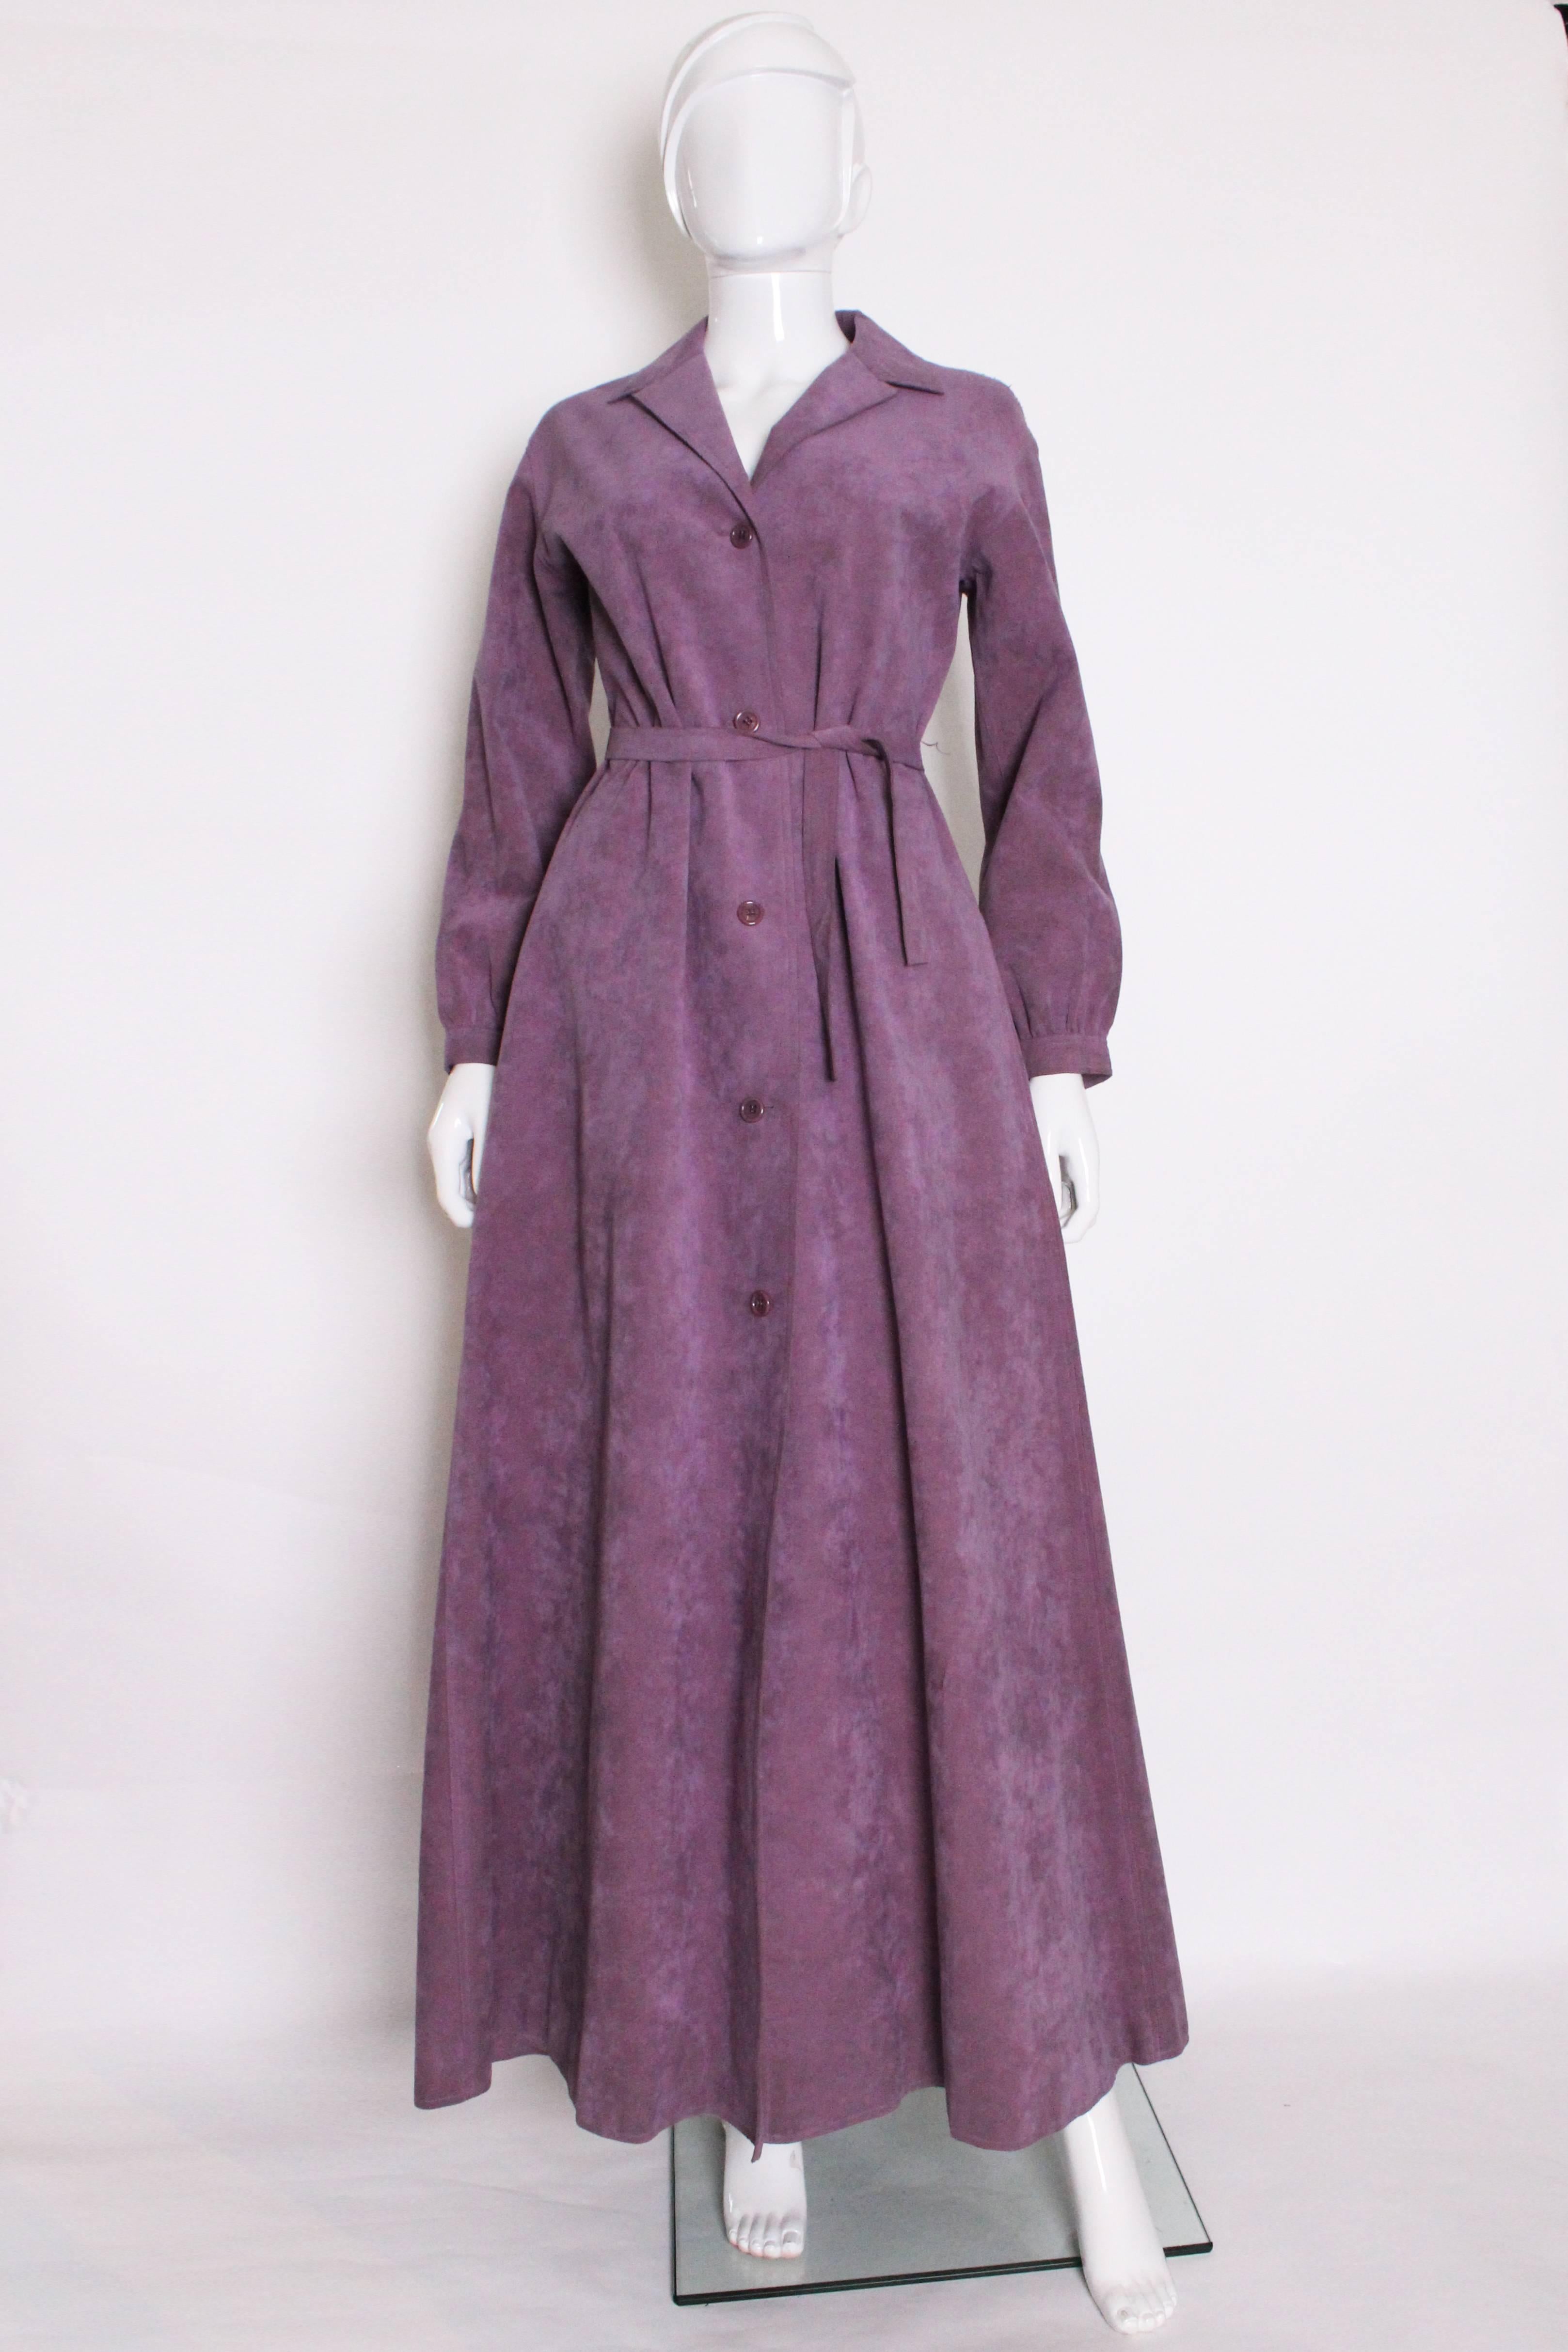 A great dress coat by 1970s style icon Halston. In lavender ultrasuede, this full length dress coat can be dressed up or down, and worn buttoned or unbuttoned. The sleeves are gathered into a narrow cuff, and there is some gathering on the back.